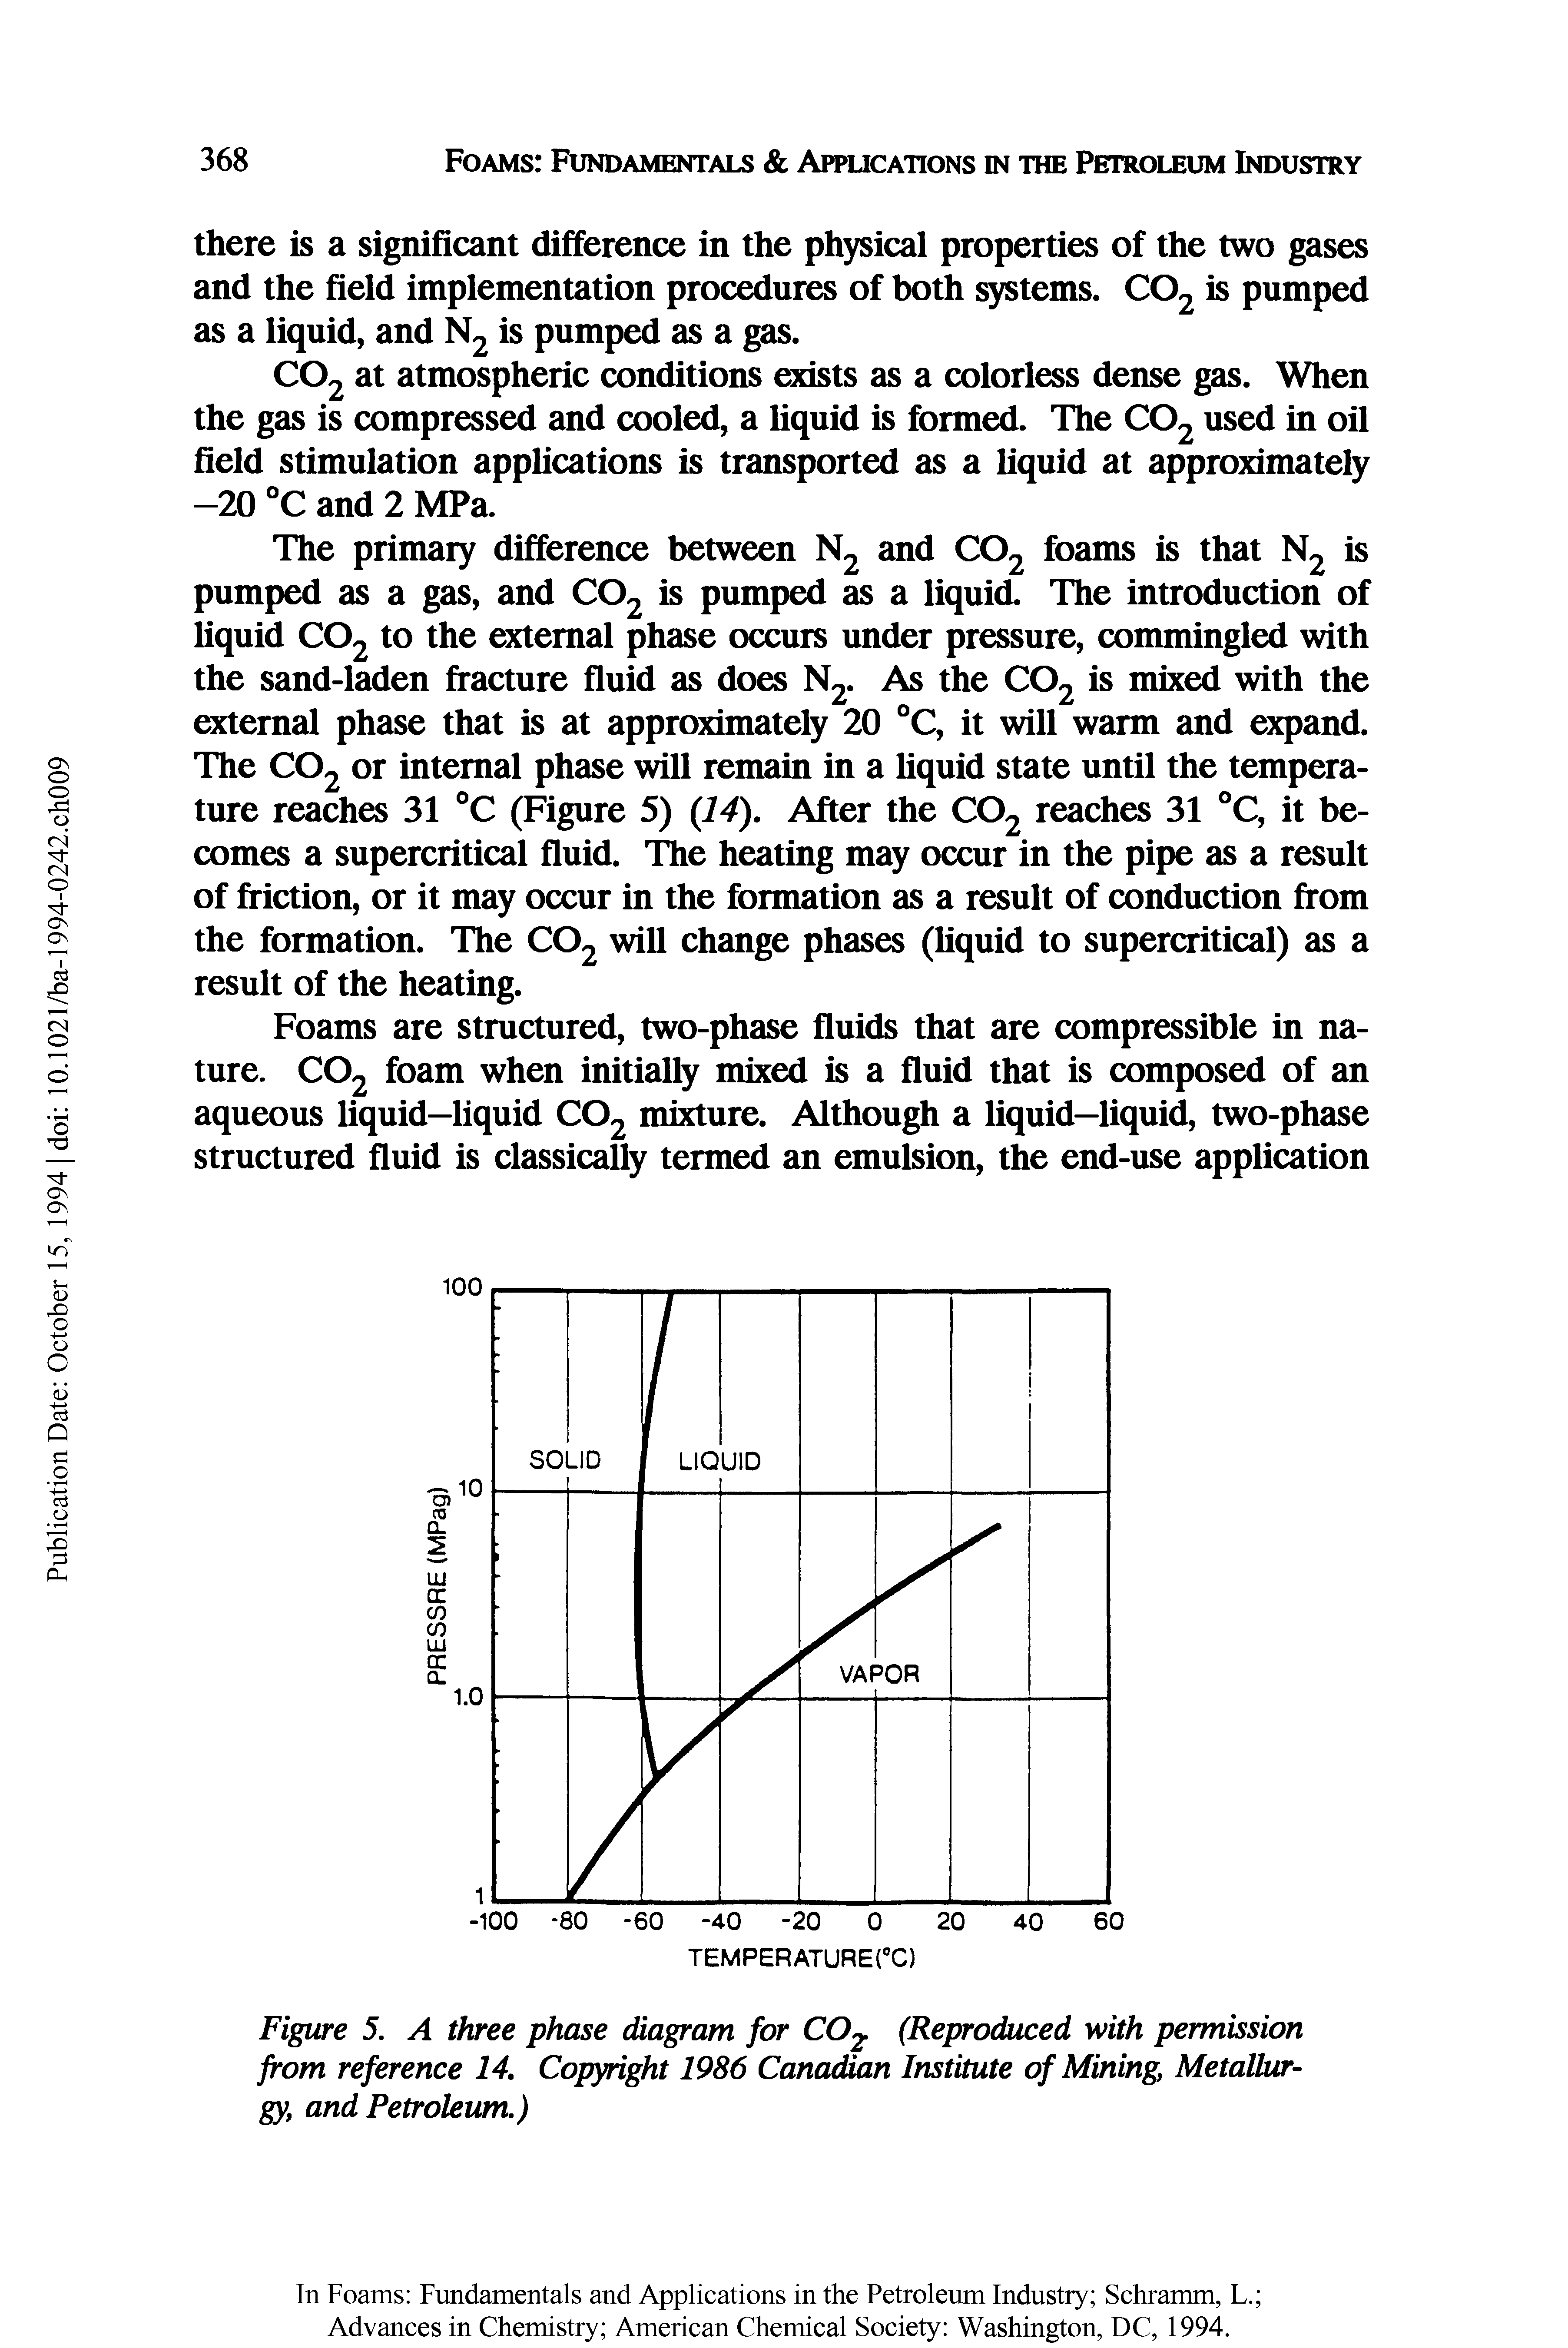 Figure 5. A three phase diagram for C02 (Reproduced with permission from reference 14. Copyright 1986 Canadian Institute of Mining Metallurgy, and Petroleum.)...